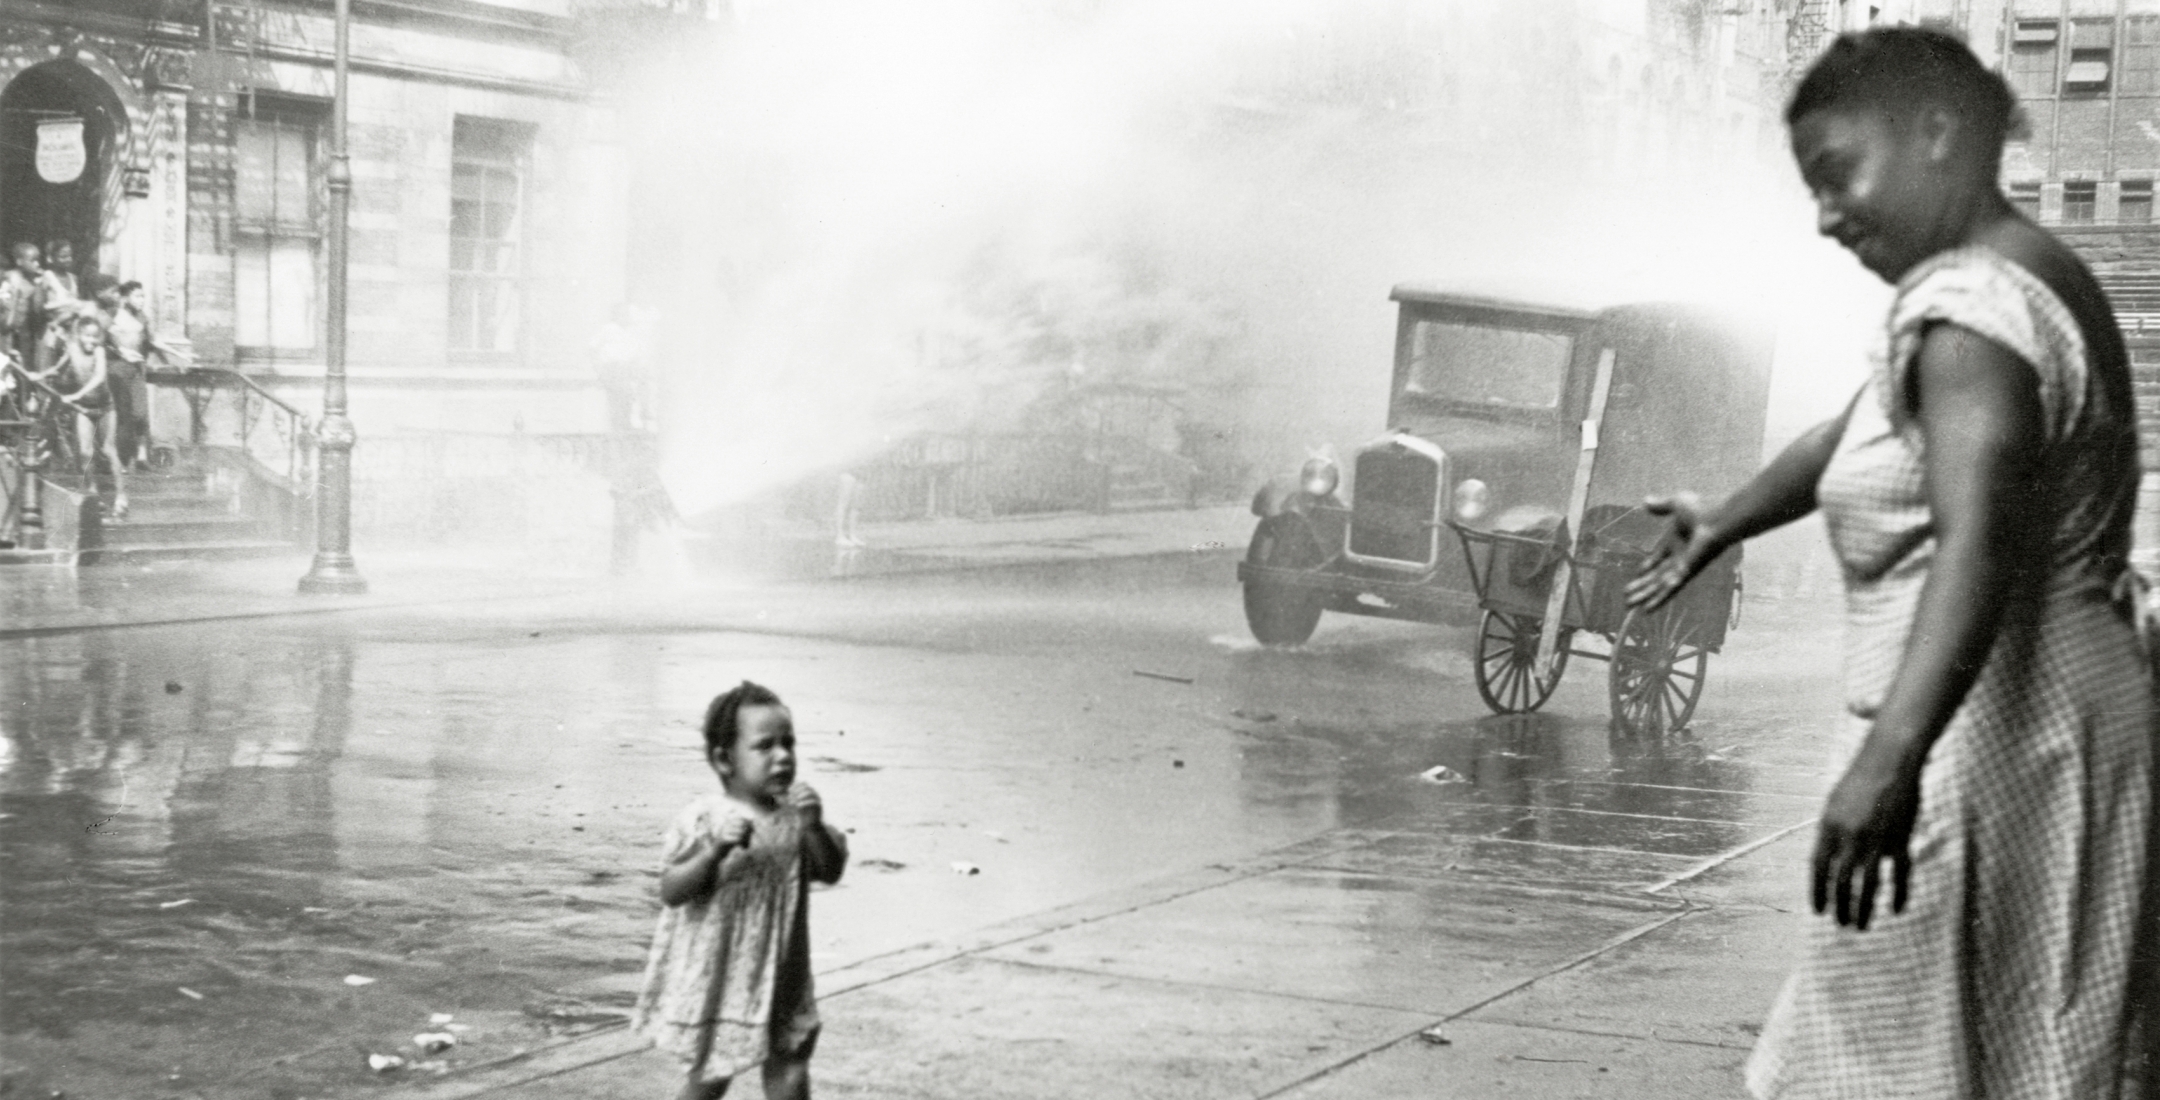 Black and white photo of a toddler crossing the street to her mother who waits with outstretched hand, behind her is an open fire hydrant where neighborhood kids are playing.